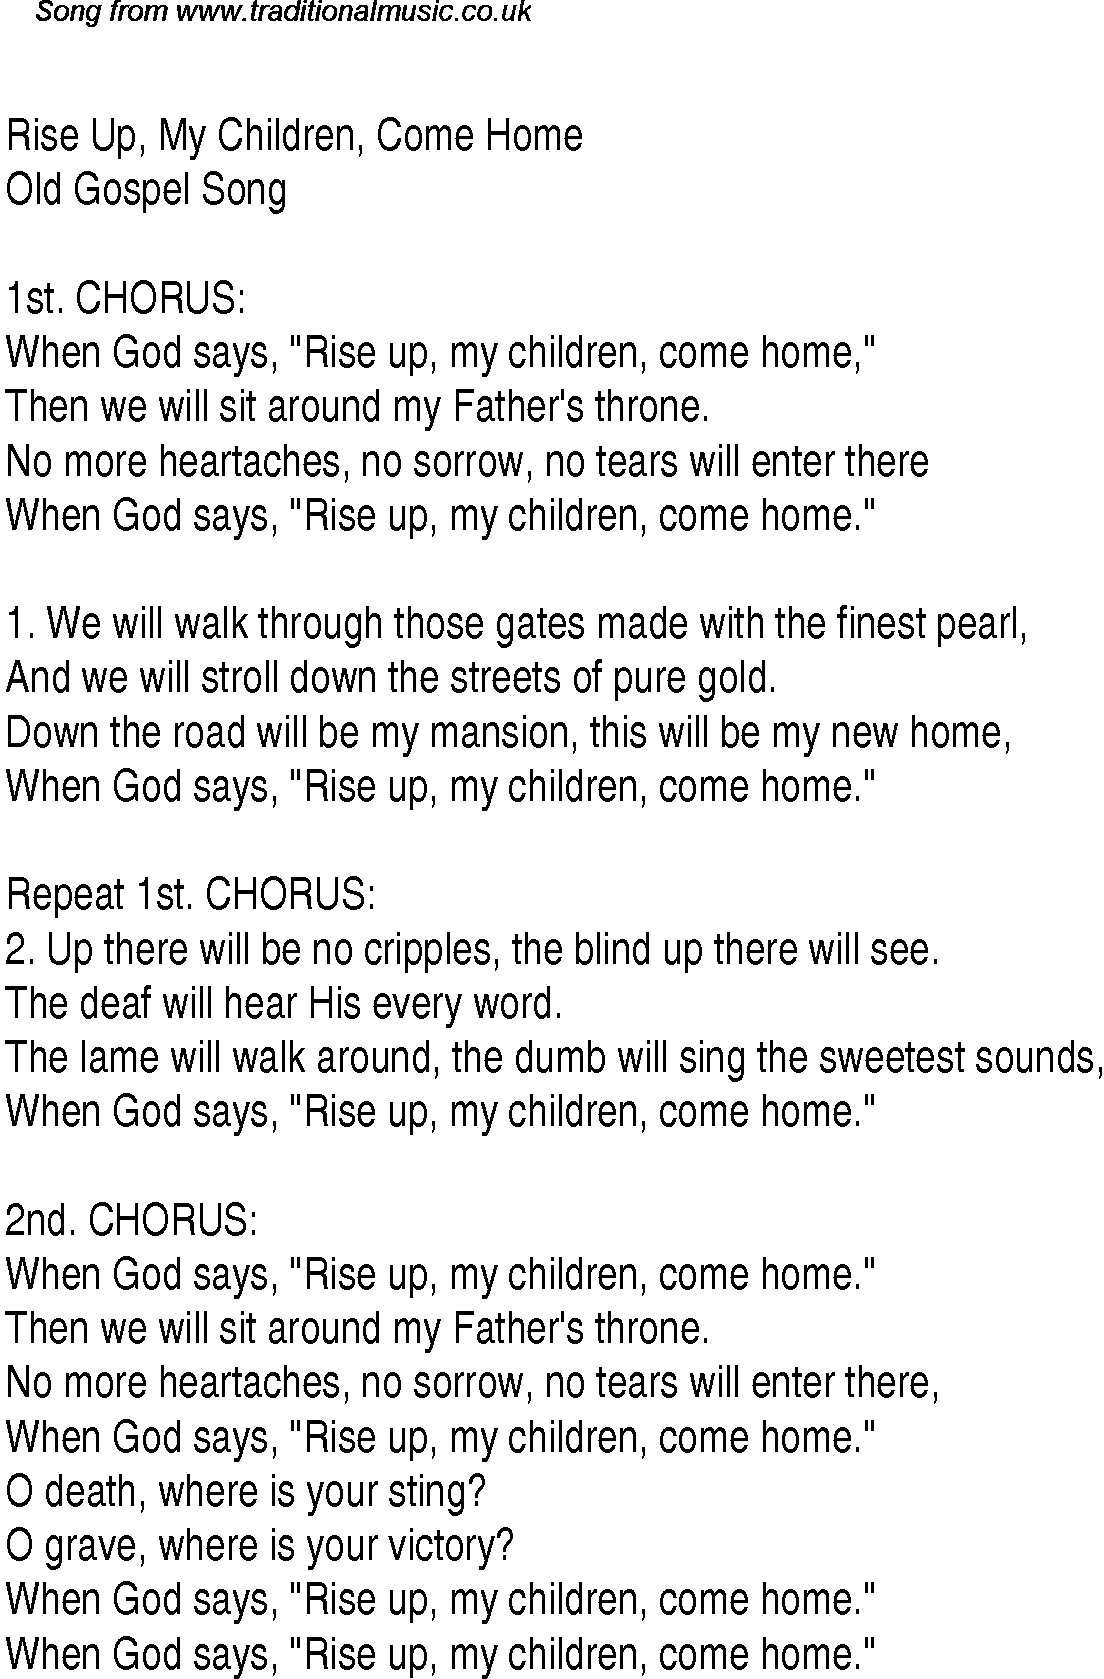 Gospel Song: rise-up,-my-children,-come-home, lyrics and chords.